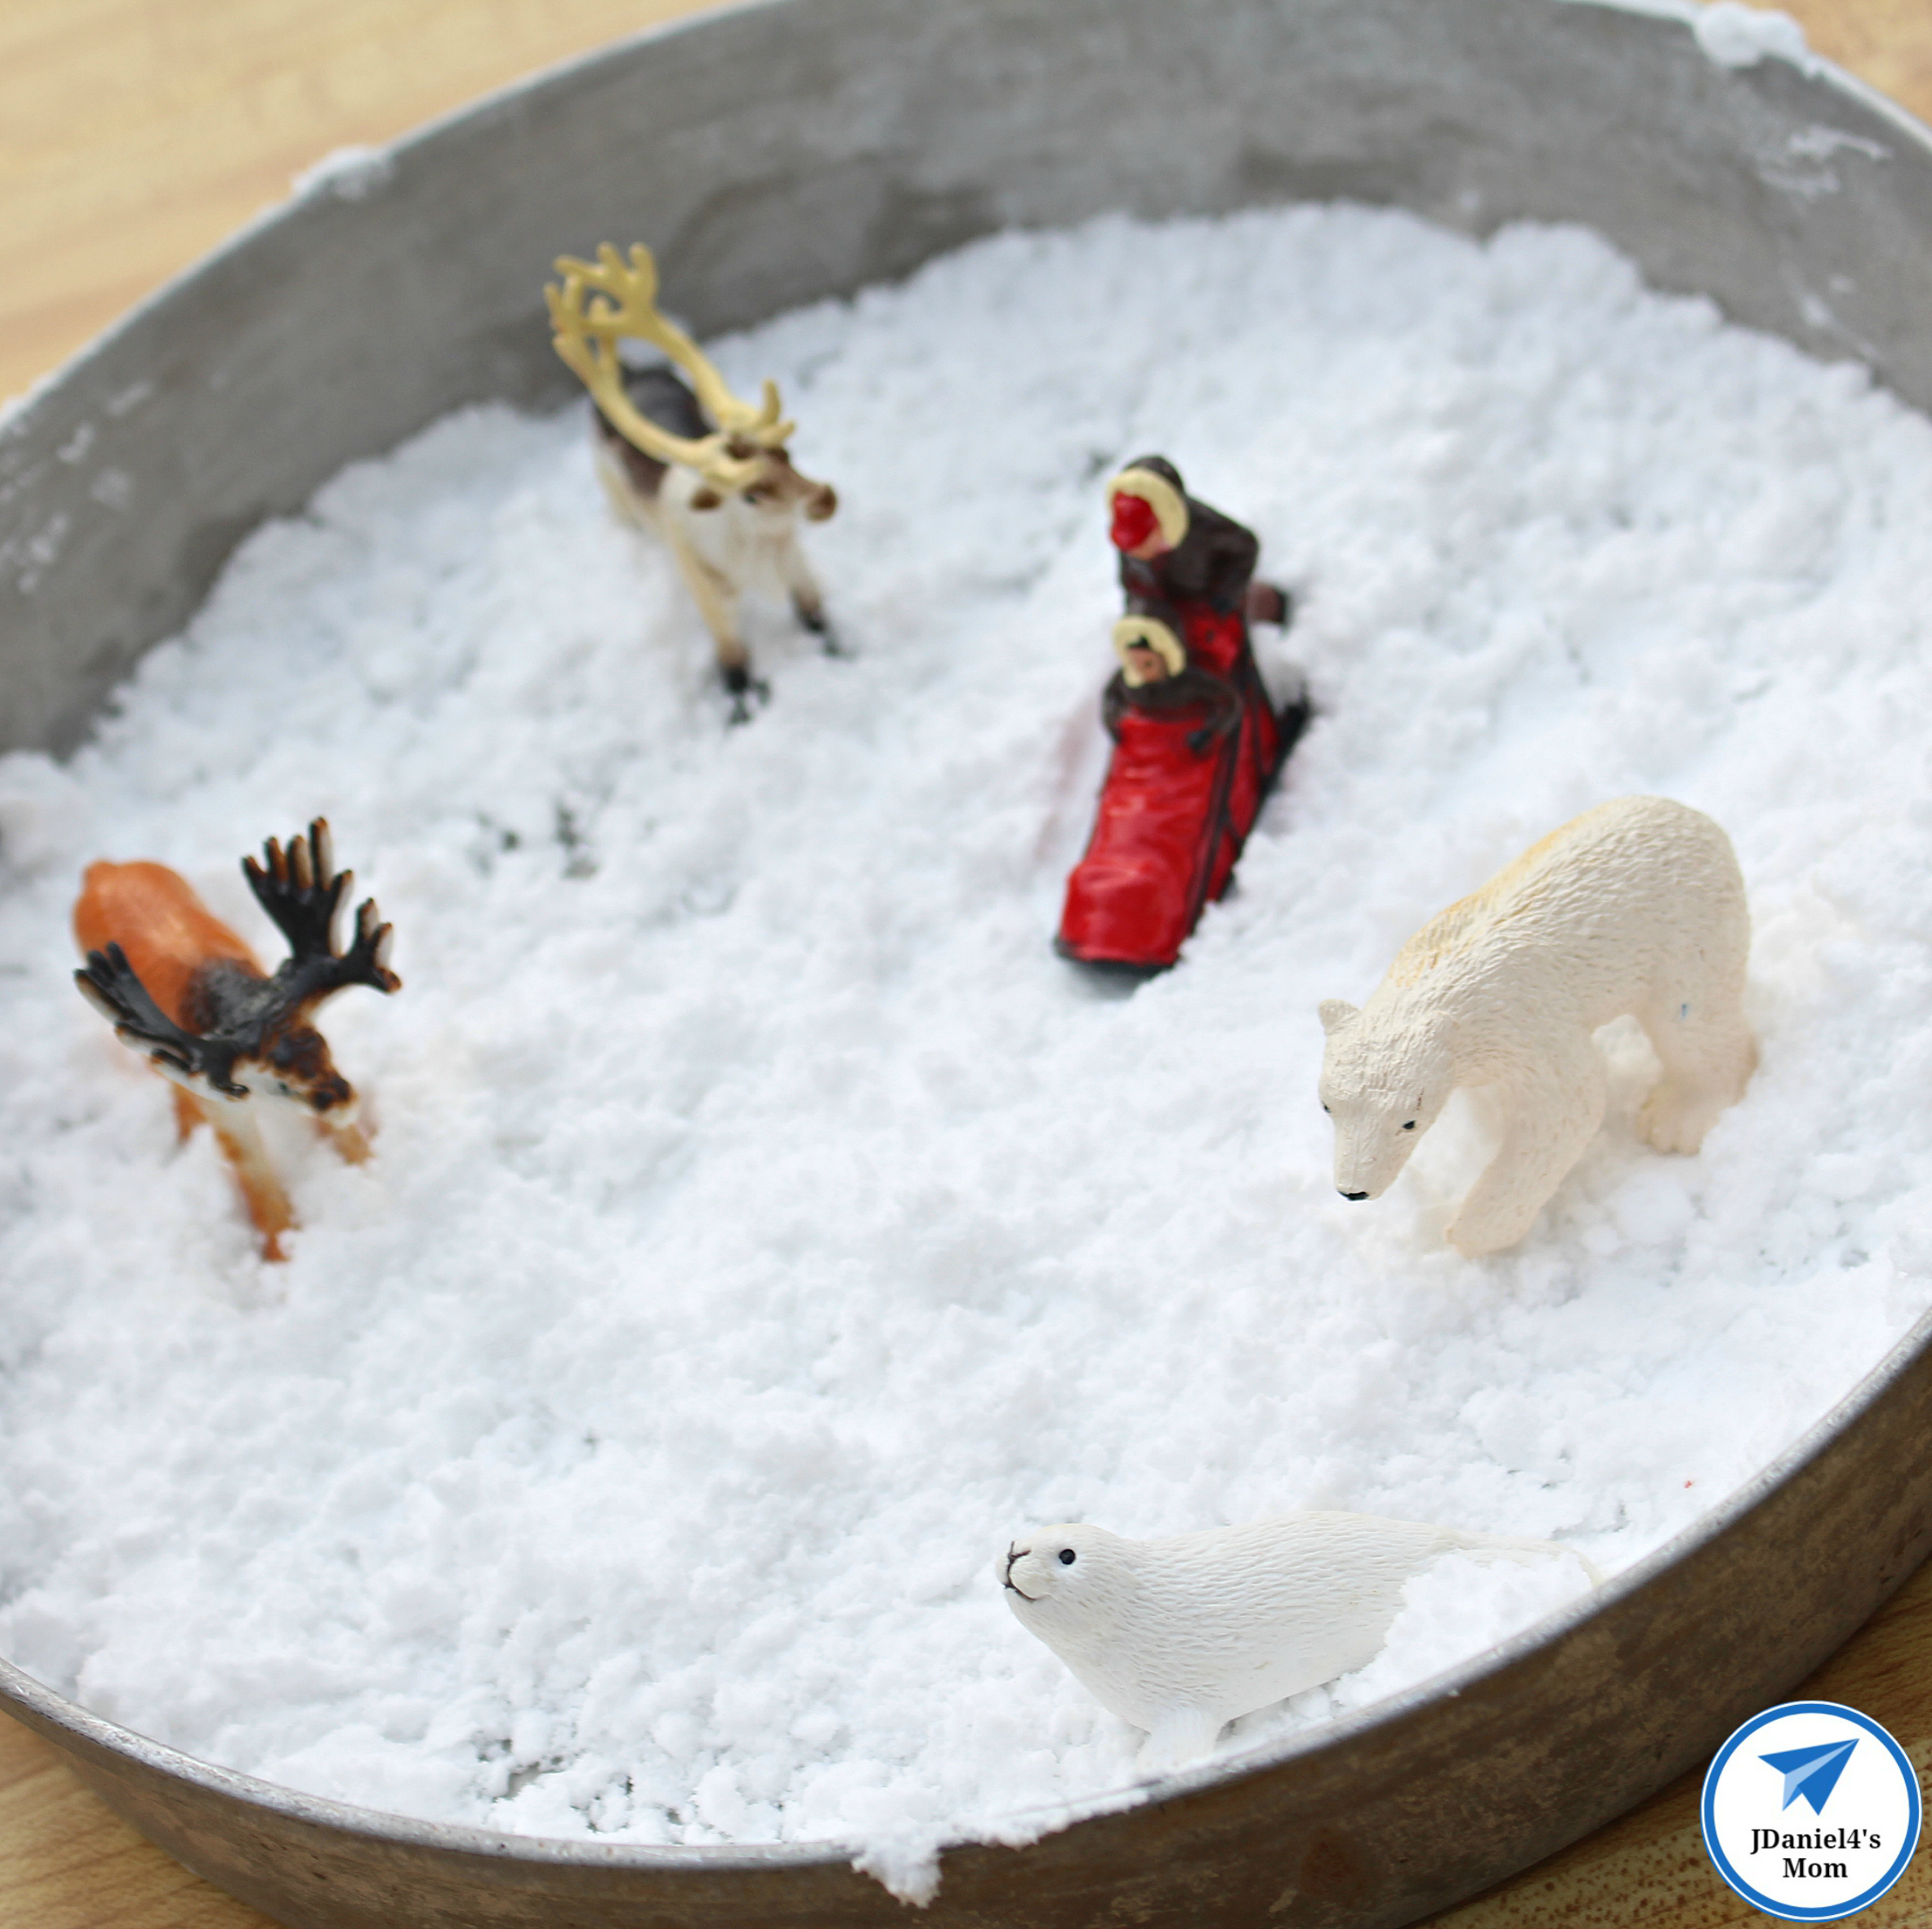 How to Make Fake Snow Recipes and Algorithm Activity with Baking Soda Close Up of Snow Scene with Safari Ltd. Figures